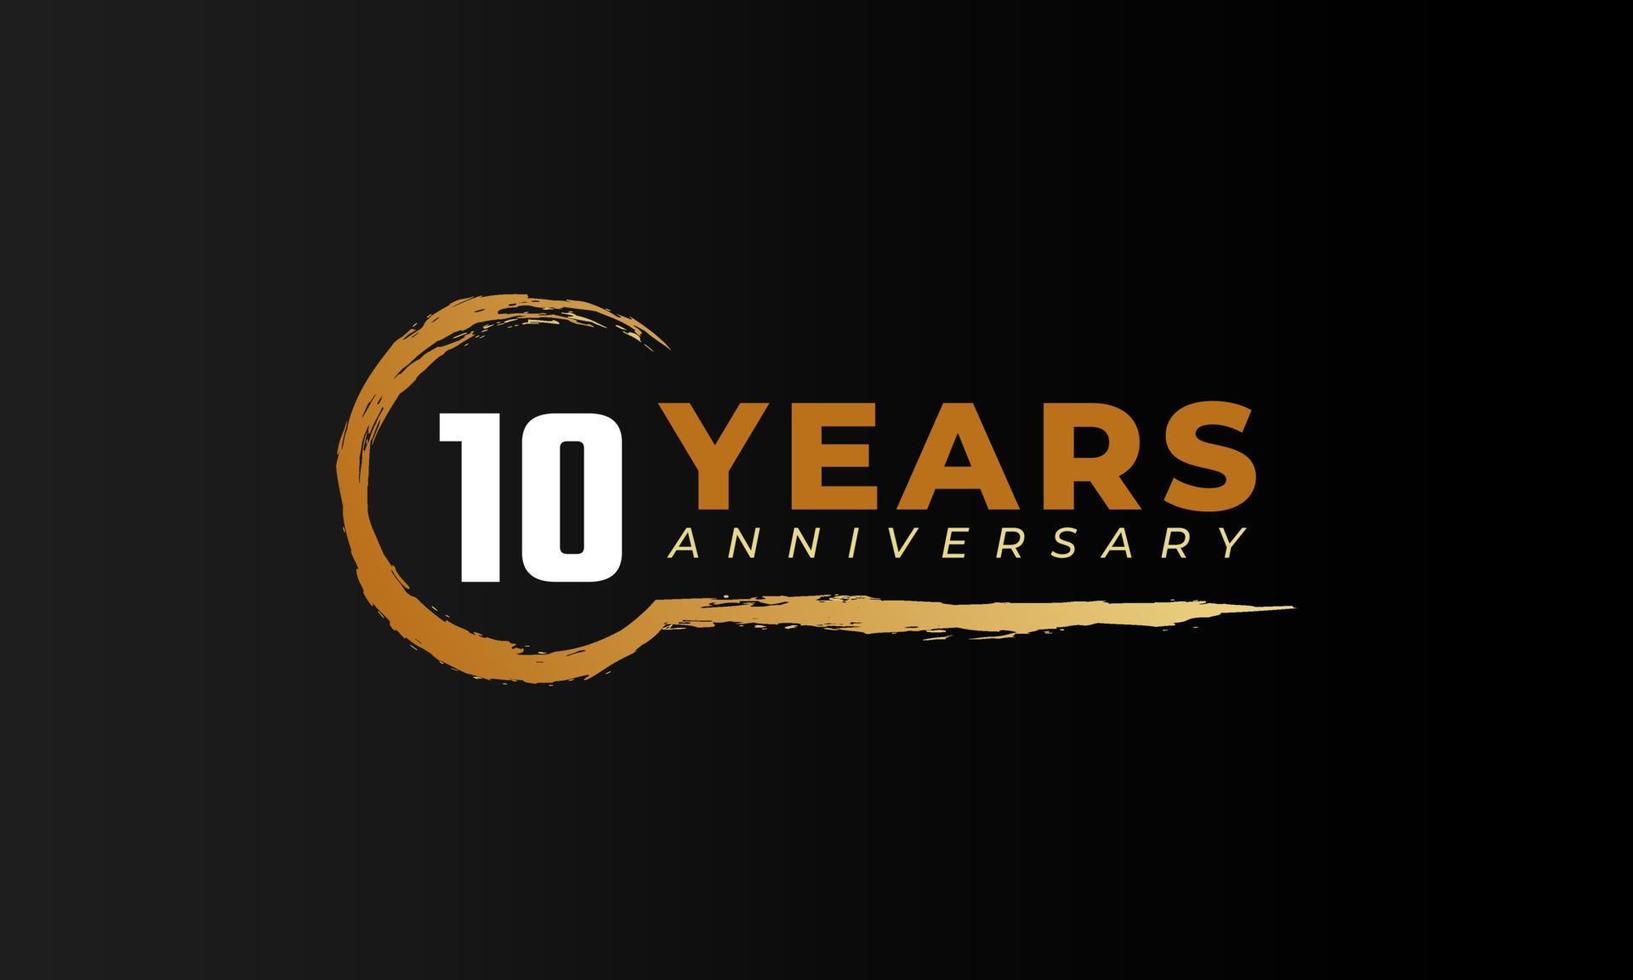 10 Year Anniversary Celebration with Circle Brush in Golden Color. Happy Anniversary Greeting Celebrates Event Isolated on Black Background vector